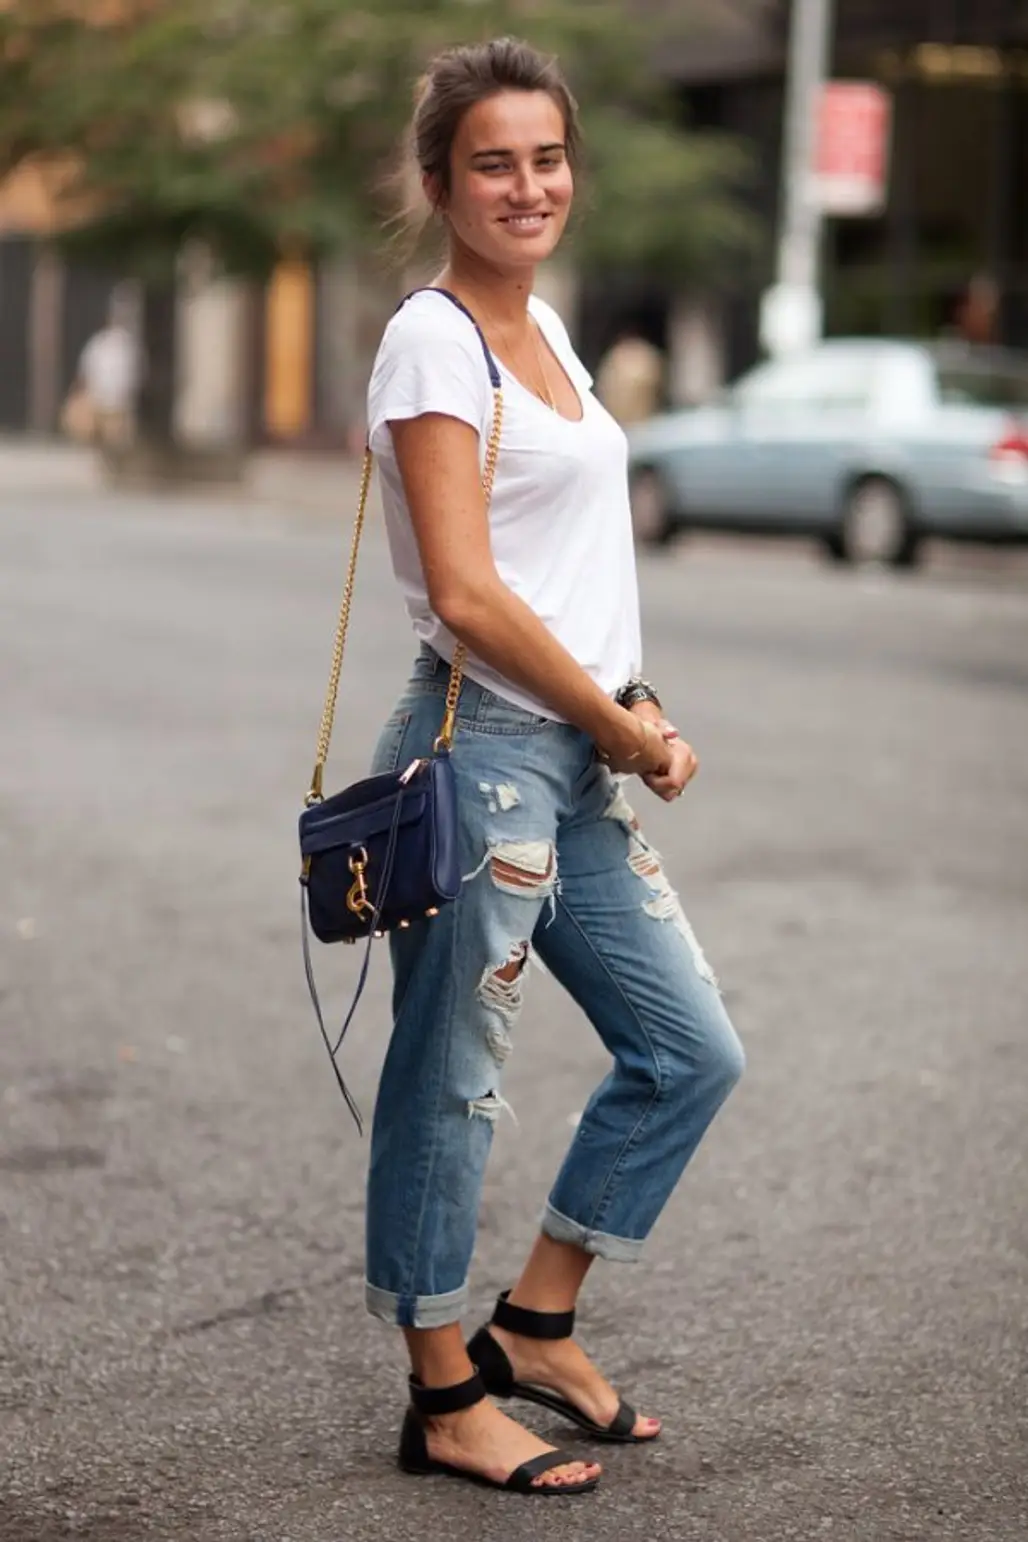 Jeans and a Tee